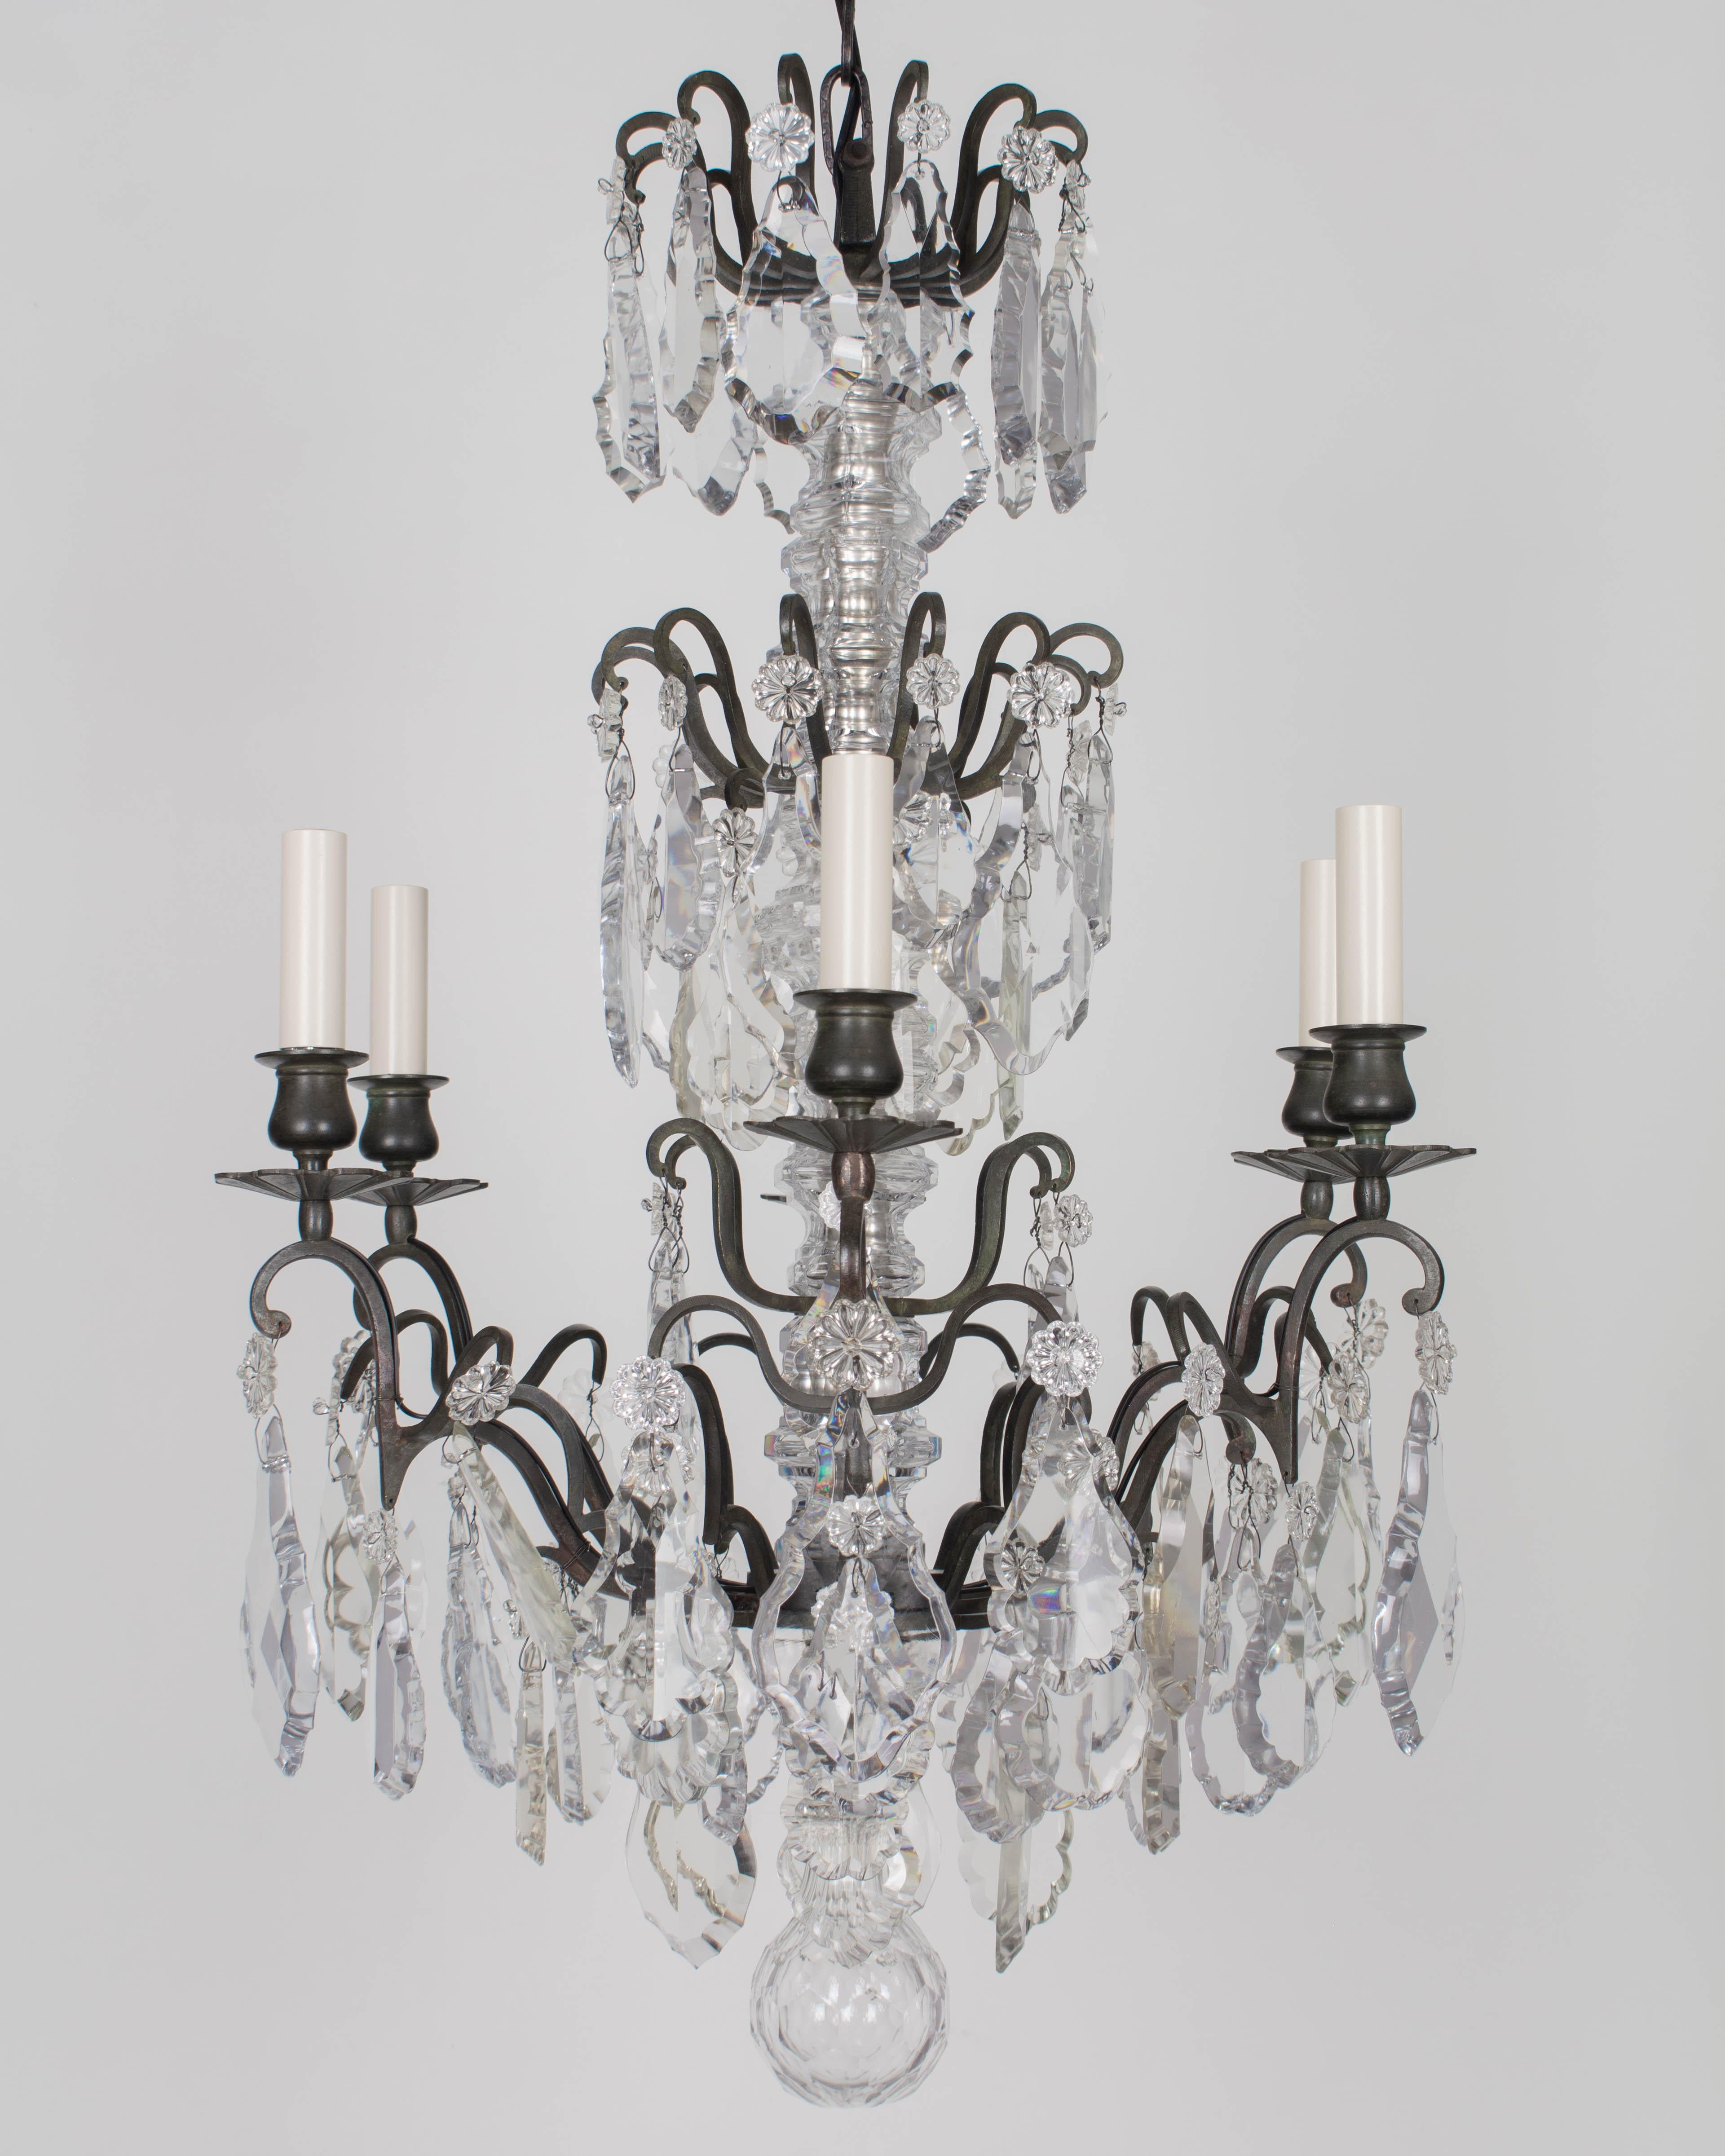 A French Louis XV style six-light chandelier with an assortment of crystal prisms and pendalogues with rosettes, center columns, and large faceted crystal sphere. Heavy solid brass frame with cast brass bobeches. Beautiful dark verdigris patina.